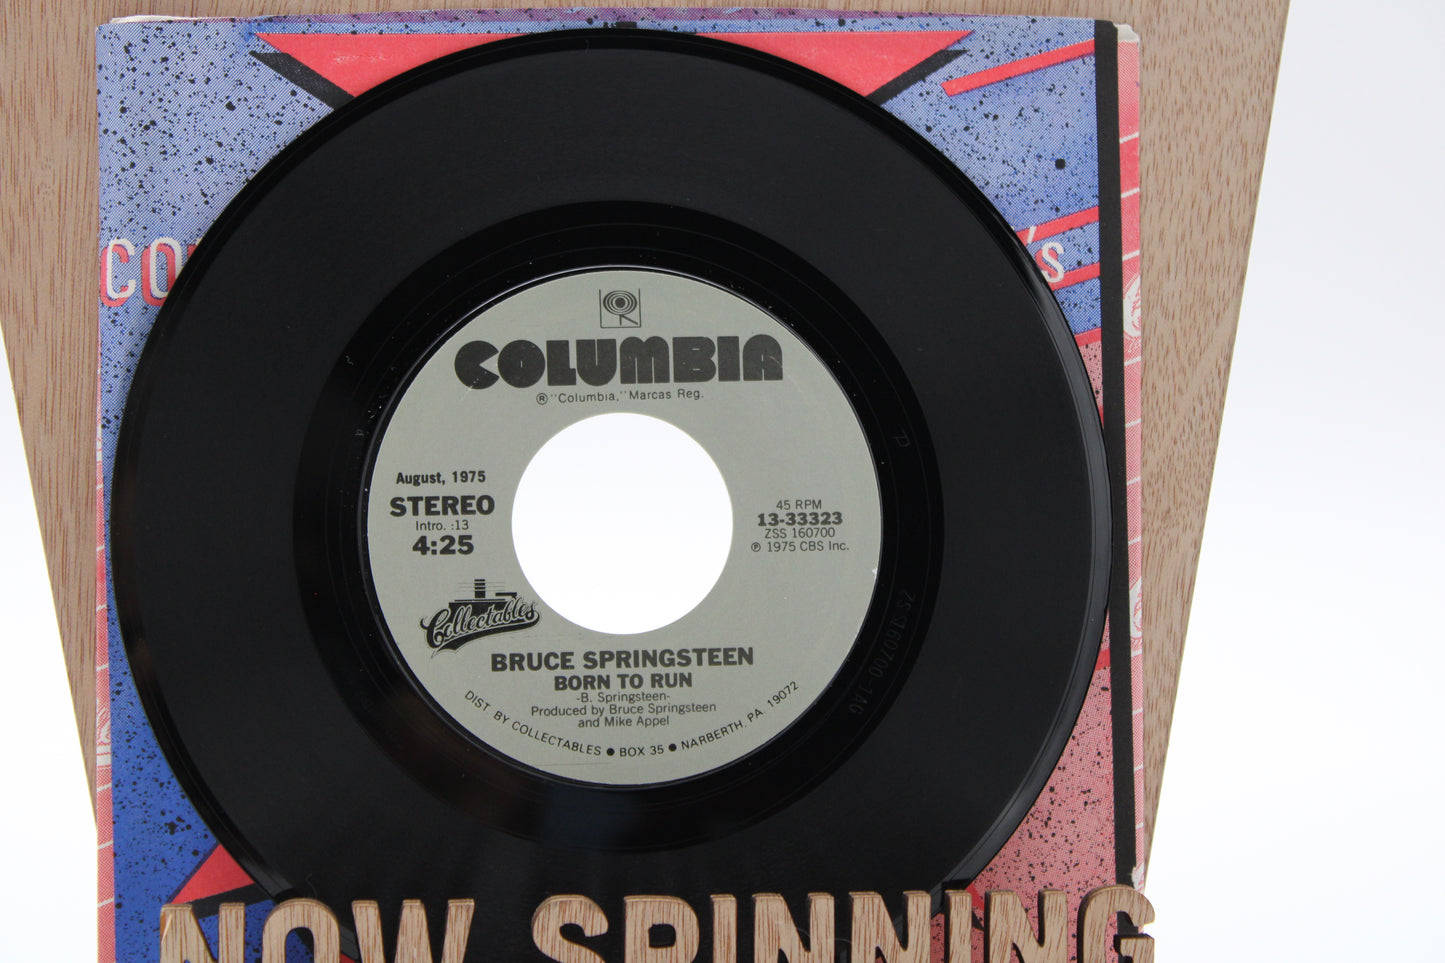 Bruce Springsteen Born To Run & Spirit In The Night 45 Record "Collectables Collector Series"